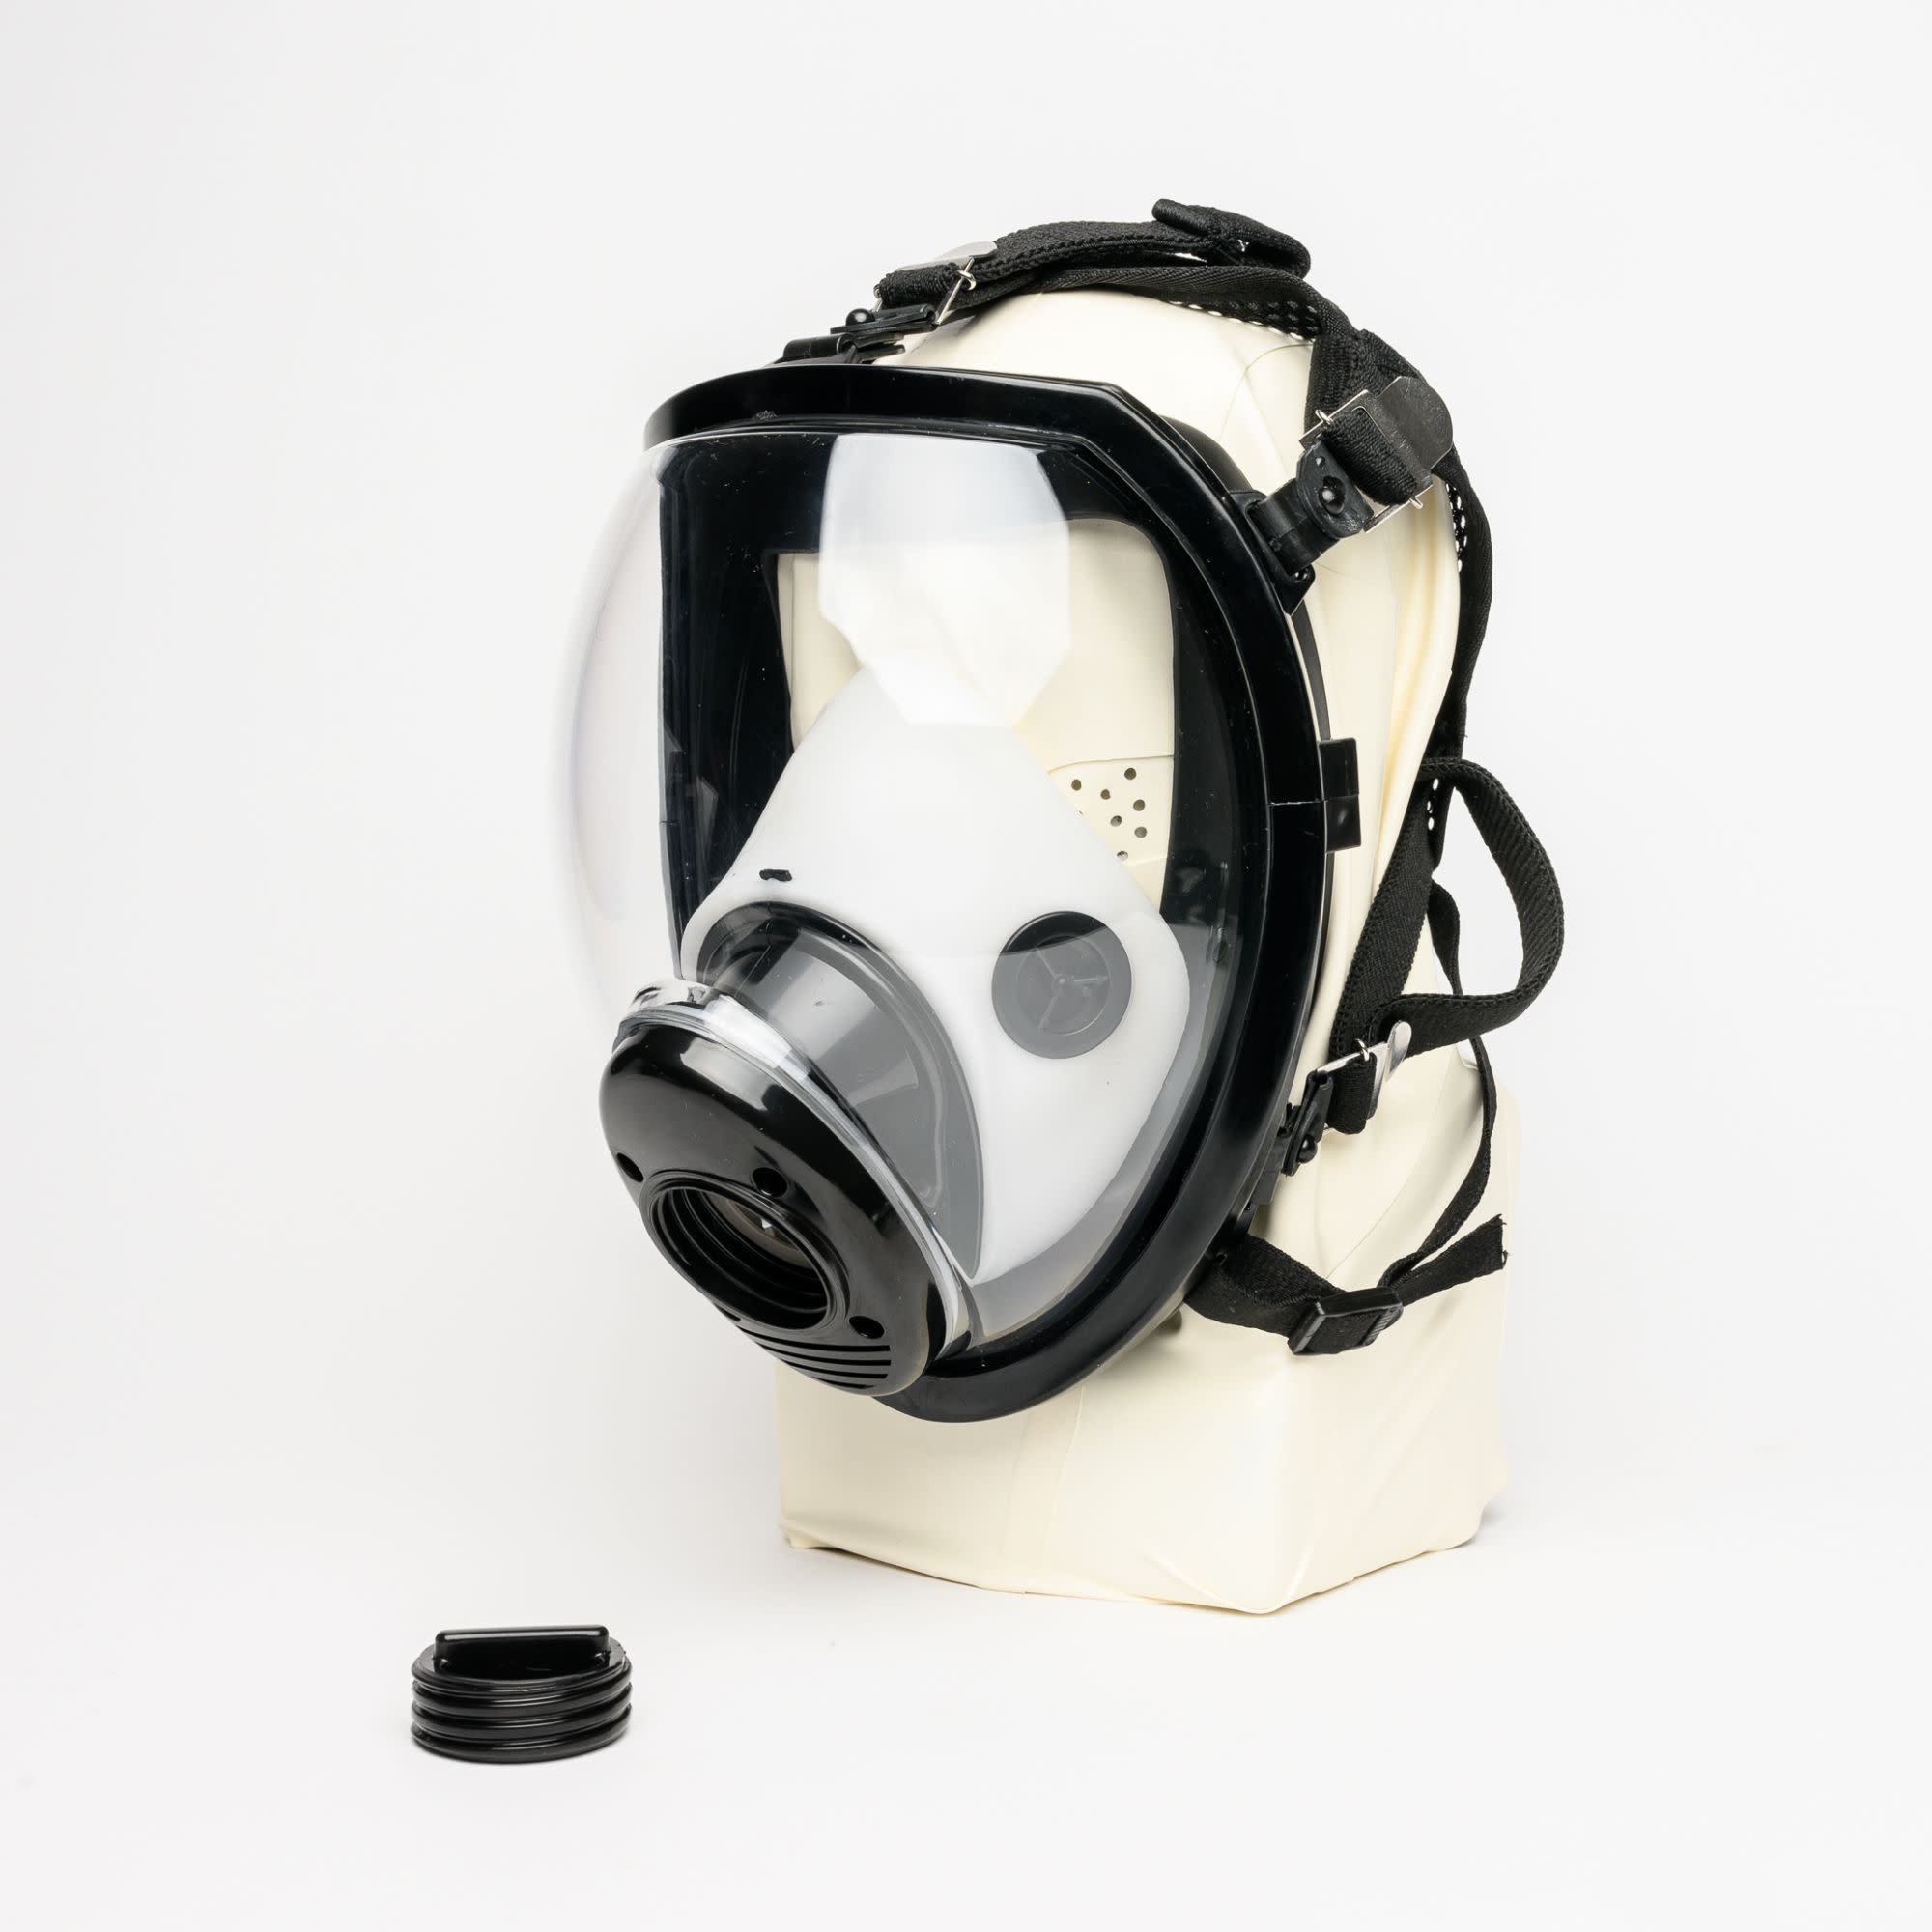 ahmed lafeer share gas mask breath play photos